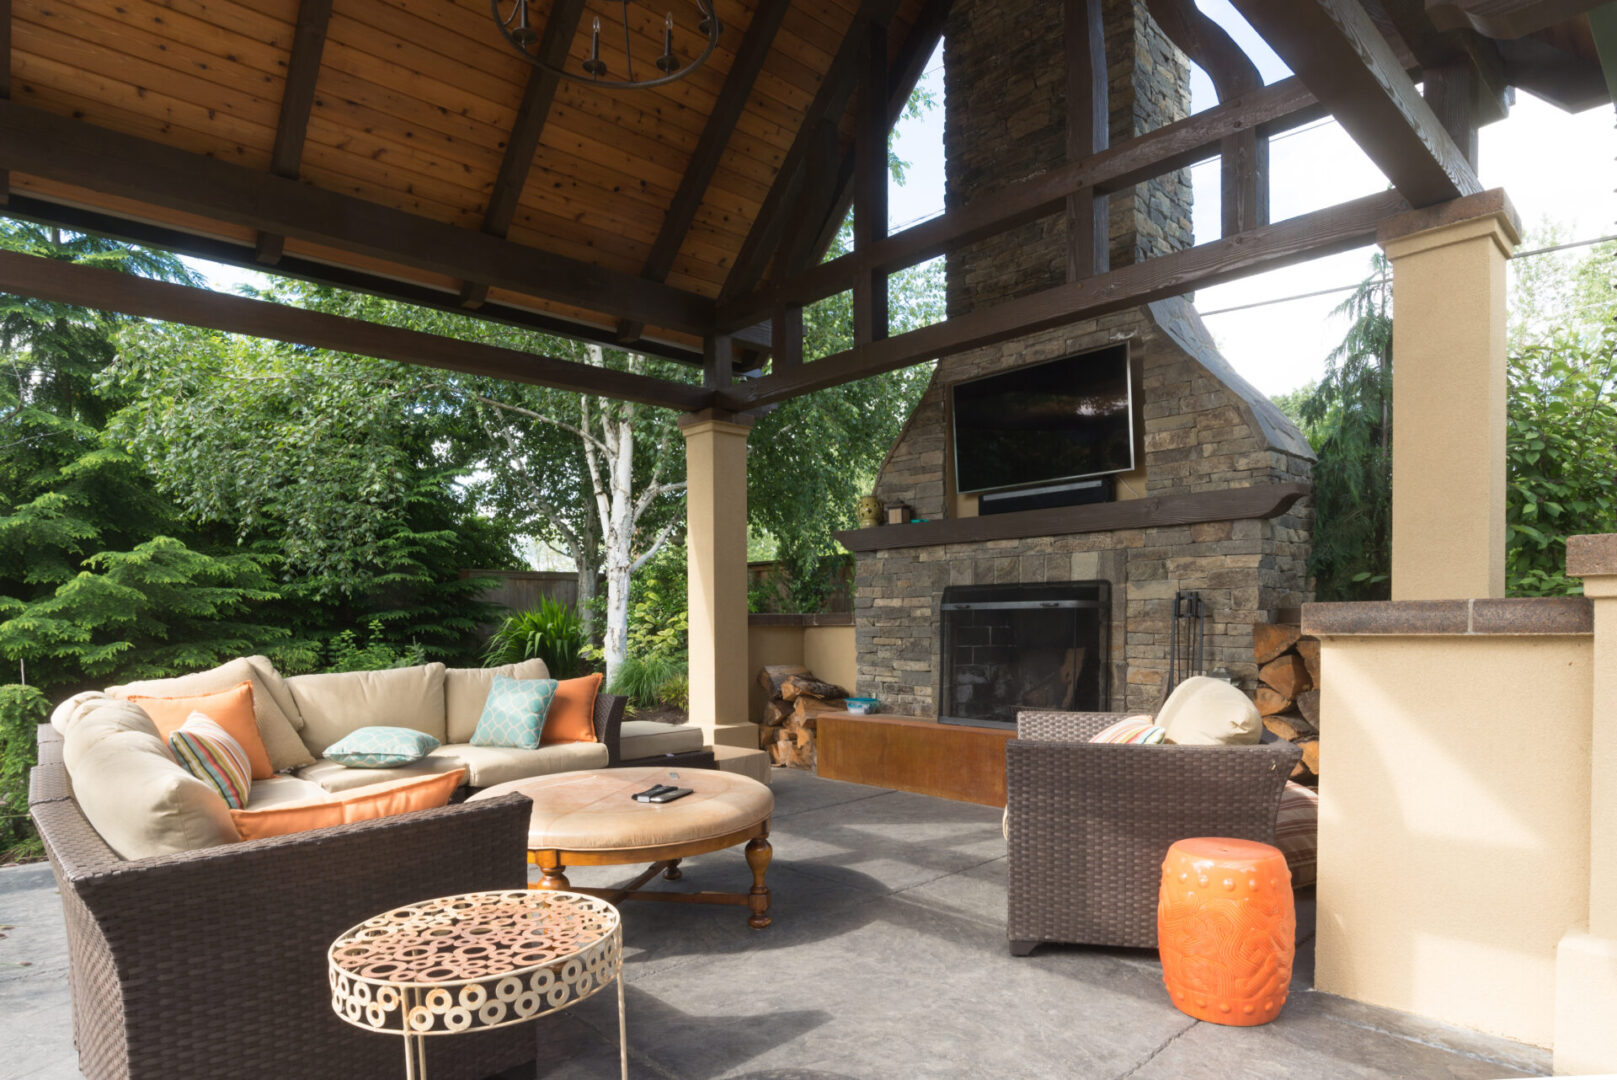 A large outdoor living room with a fireplace.